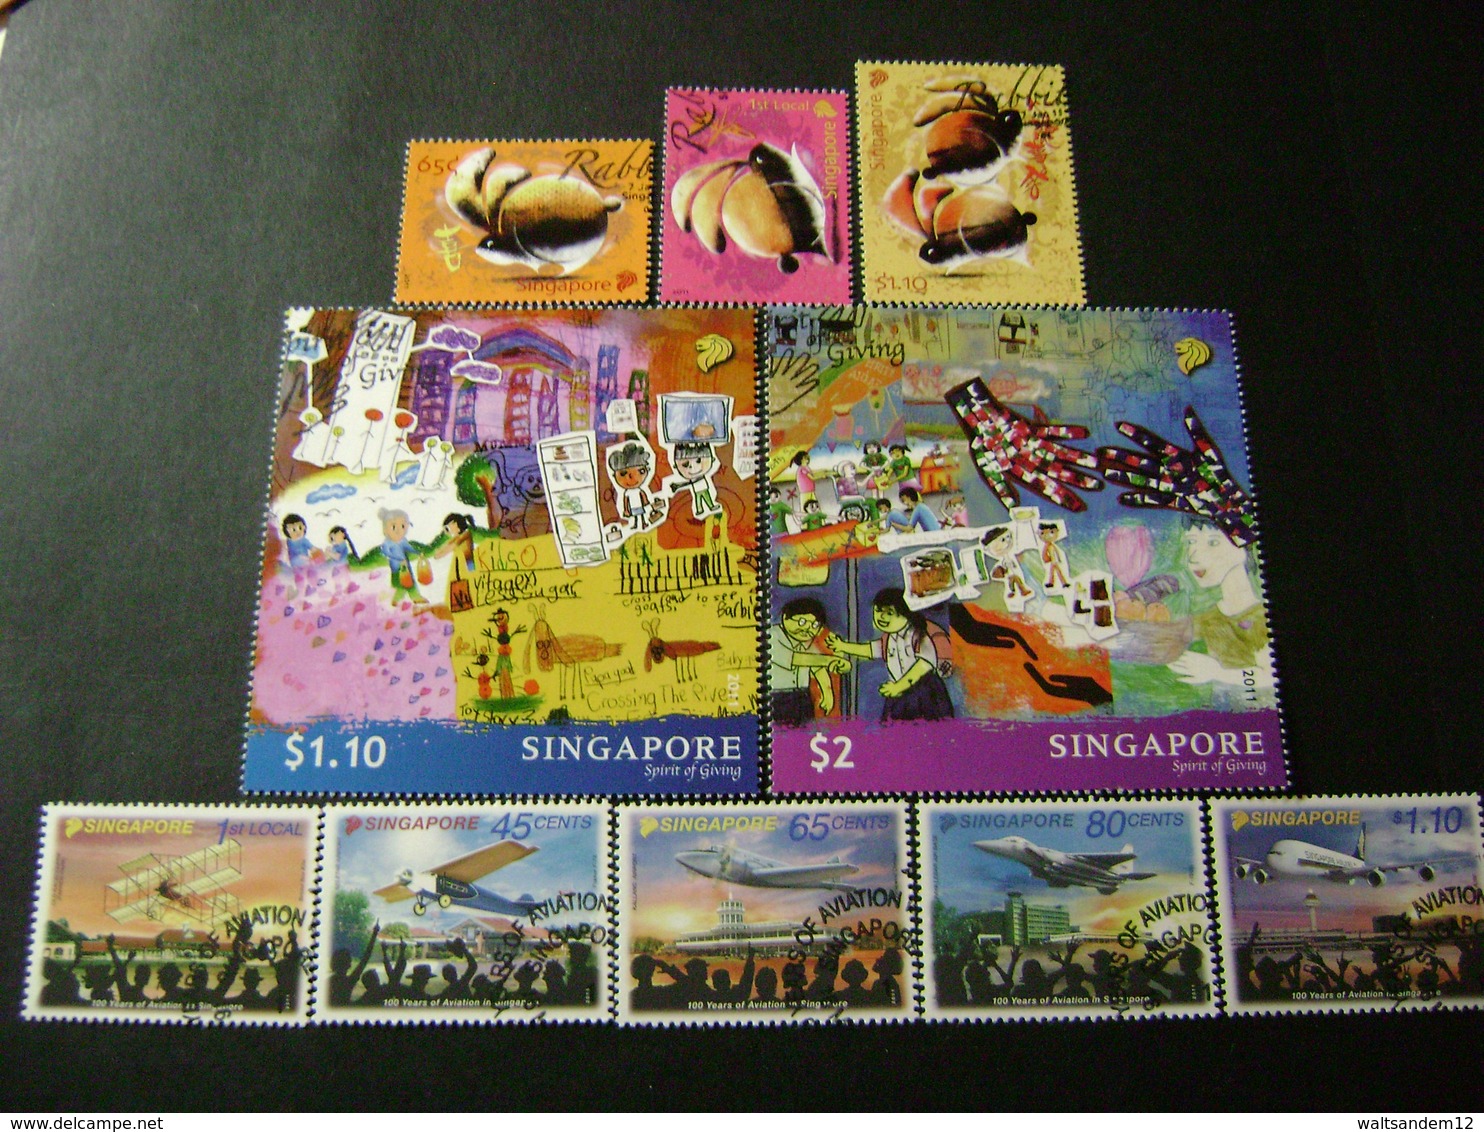 Singapore 2010 To Early 2011 Commemorative/special Issues (SG Between 1888 And 1984 - See Description) 4 Images - Used - Singapore (1959-...)